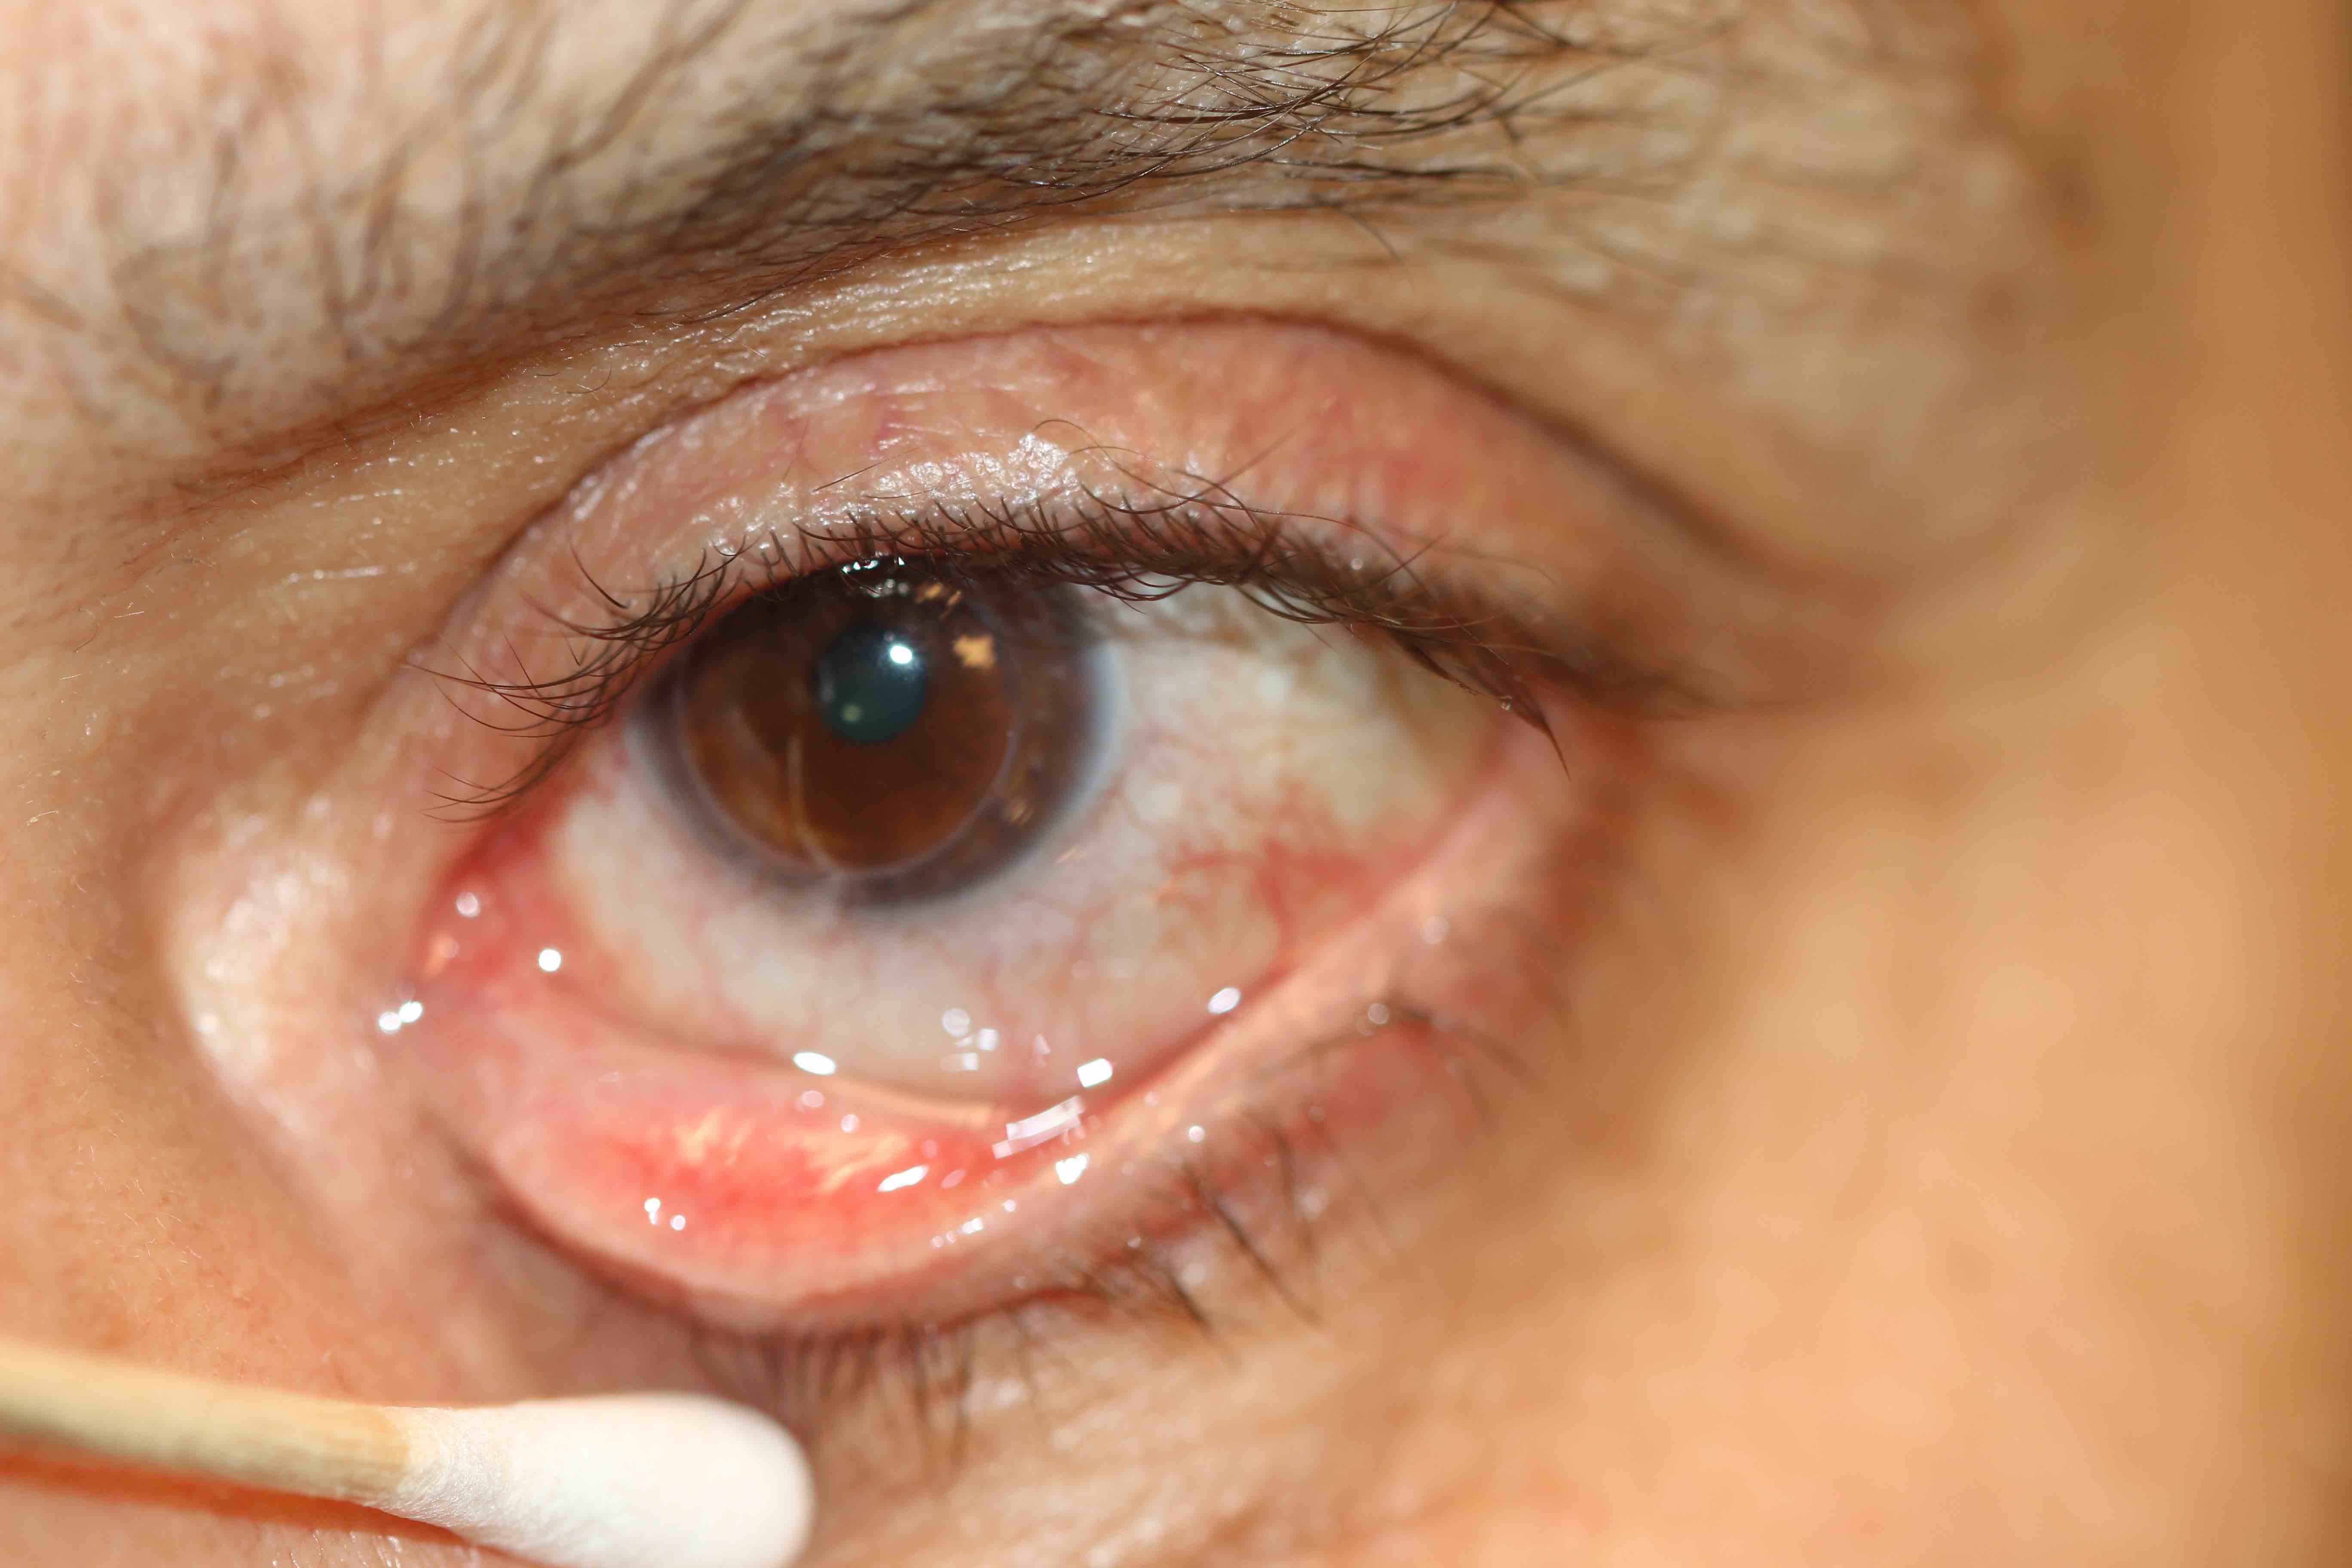 Punctal membrane caused by a chronic follicular conjunctivitis. Membranes may also develop in the presence of nasolacrimal duct obstruction or canaliculitis